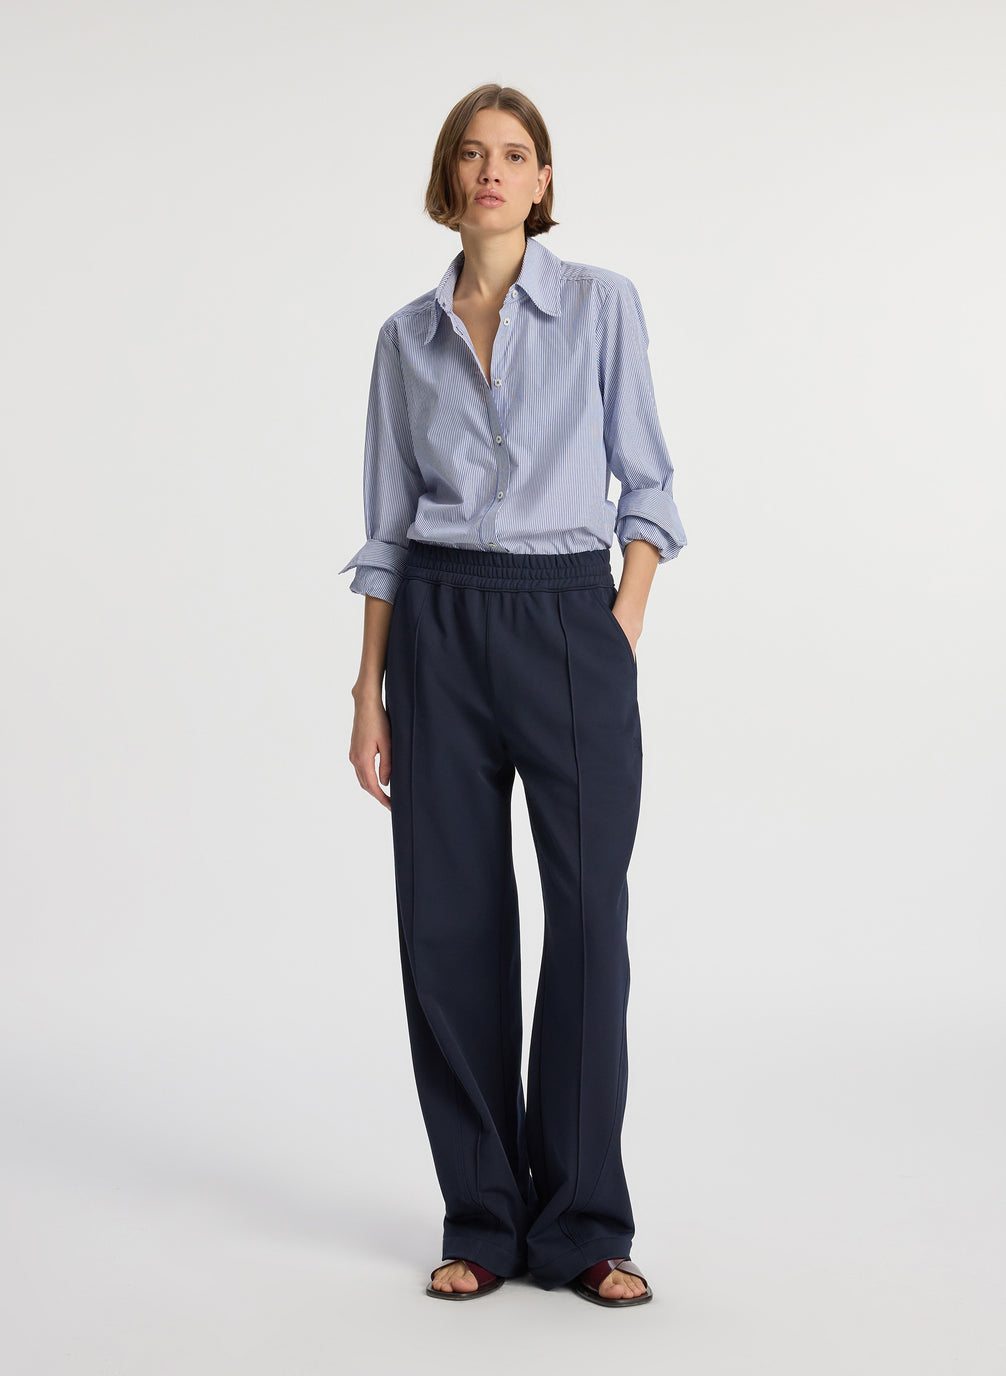 front view of woman wearing blue striped button down collared shirt and navy blue pants